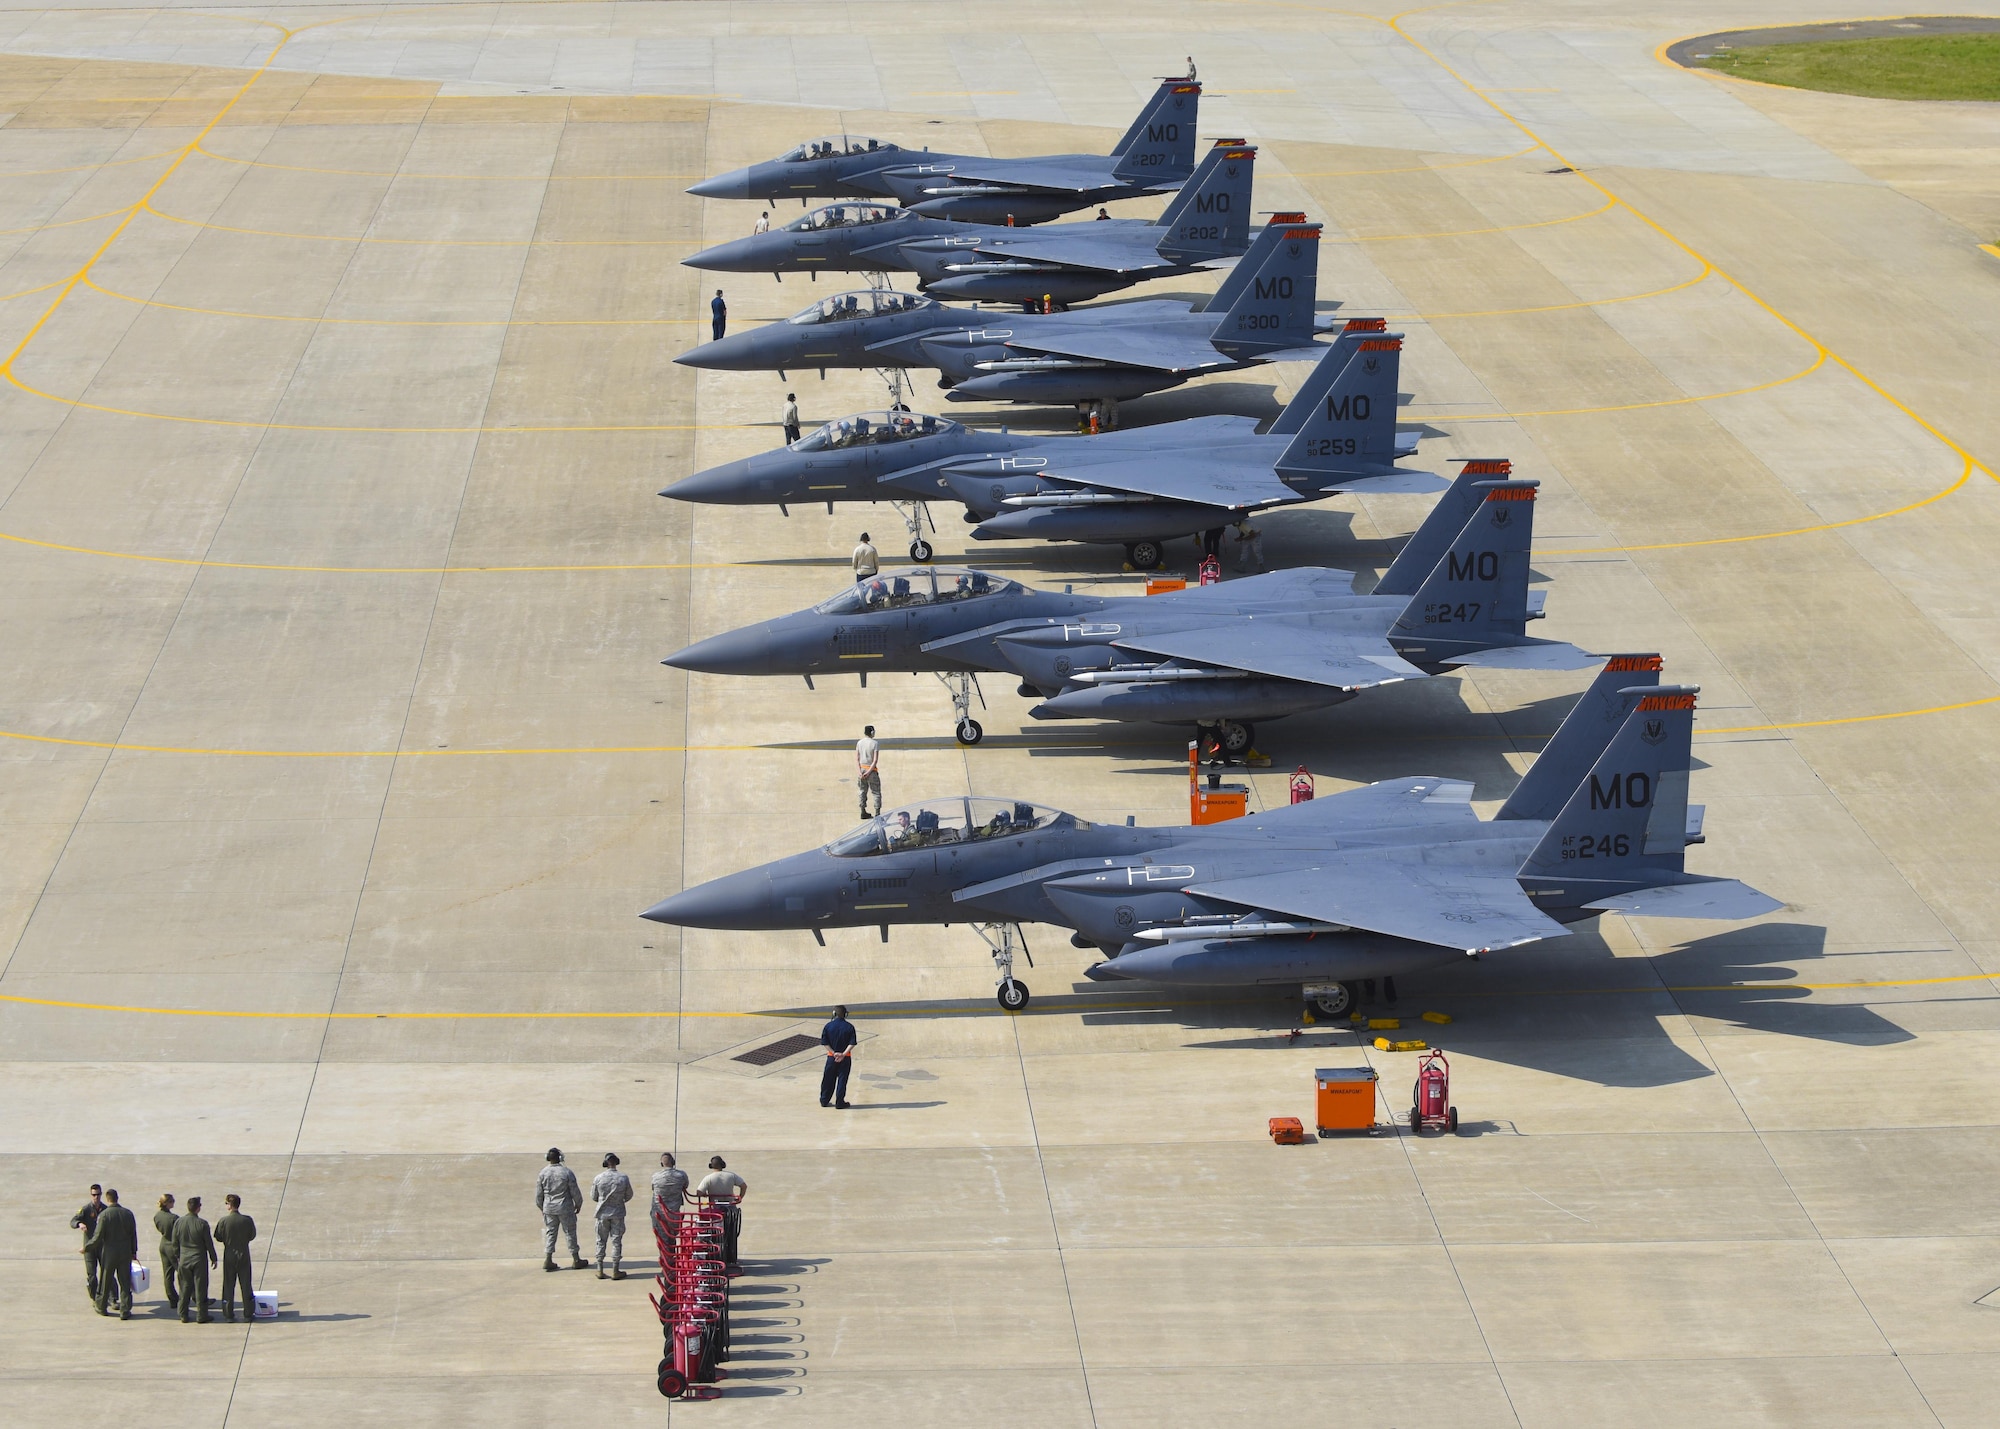 U.S. Air Force F-15E Strike Eagles assigned to Mountain Home Air Force Base, Idaho, park on the flightline during ATLANTIC TRIDENT 17 at Joint Base Langley-Eustis, Va., April 14, 2017. While playing the role of adversarial aircraft during the exercise, the F-15E provides Airmen and allied partners the opportunity to experience realistic combat scenarios that enhance the ability to effectively fight together in combat environments. (U.S. Air Force photo/Airman 1st Class Anthony Nin Leclerec)